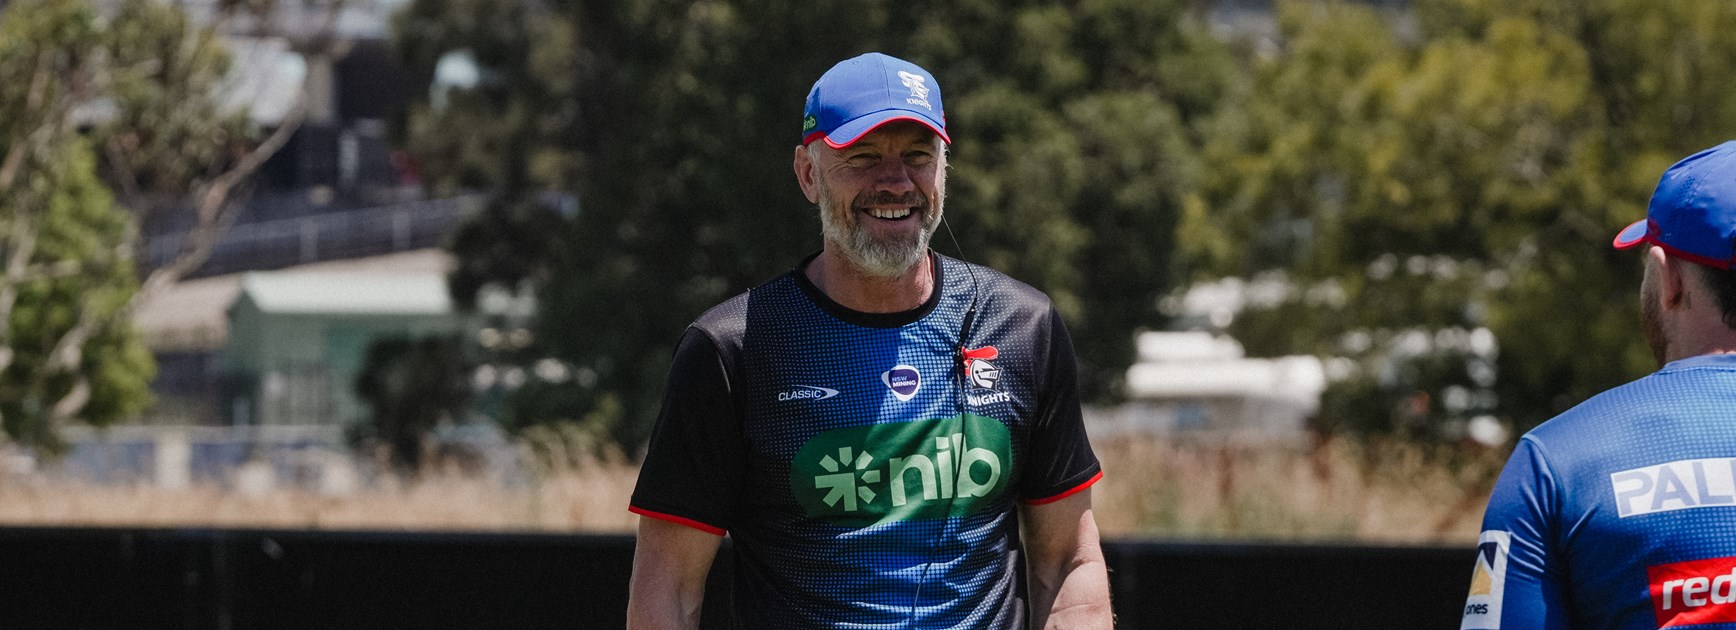 McDermott on English Super League triumphs and joining the coaching staff